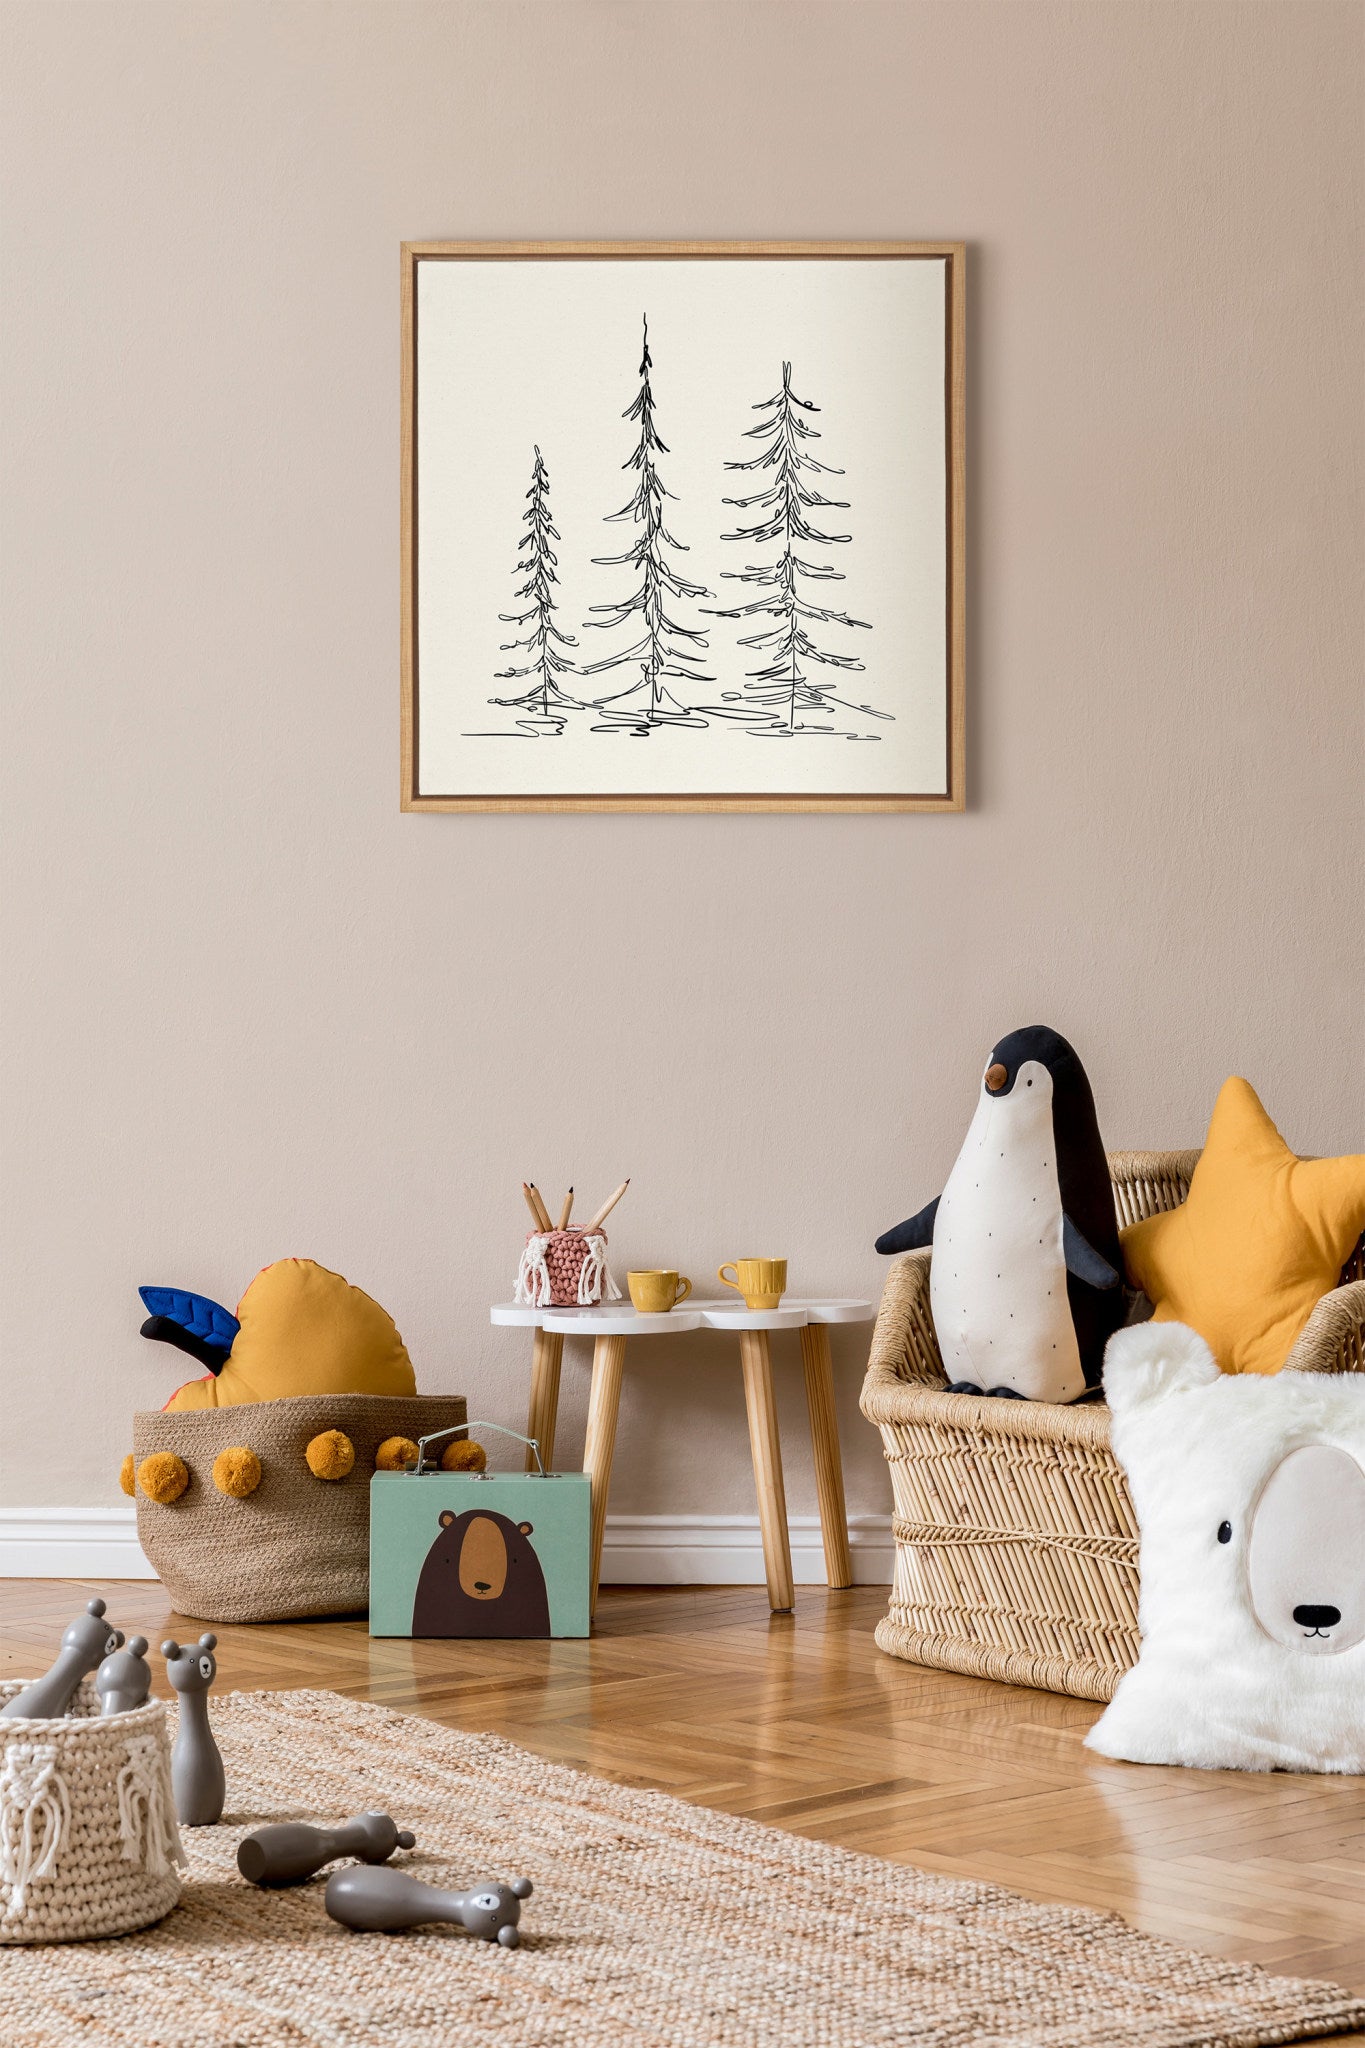 Sylvie Minimalist Evergreen Trees Sketch Framed Canvas by The Creative Bunch Studio